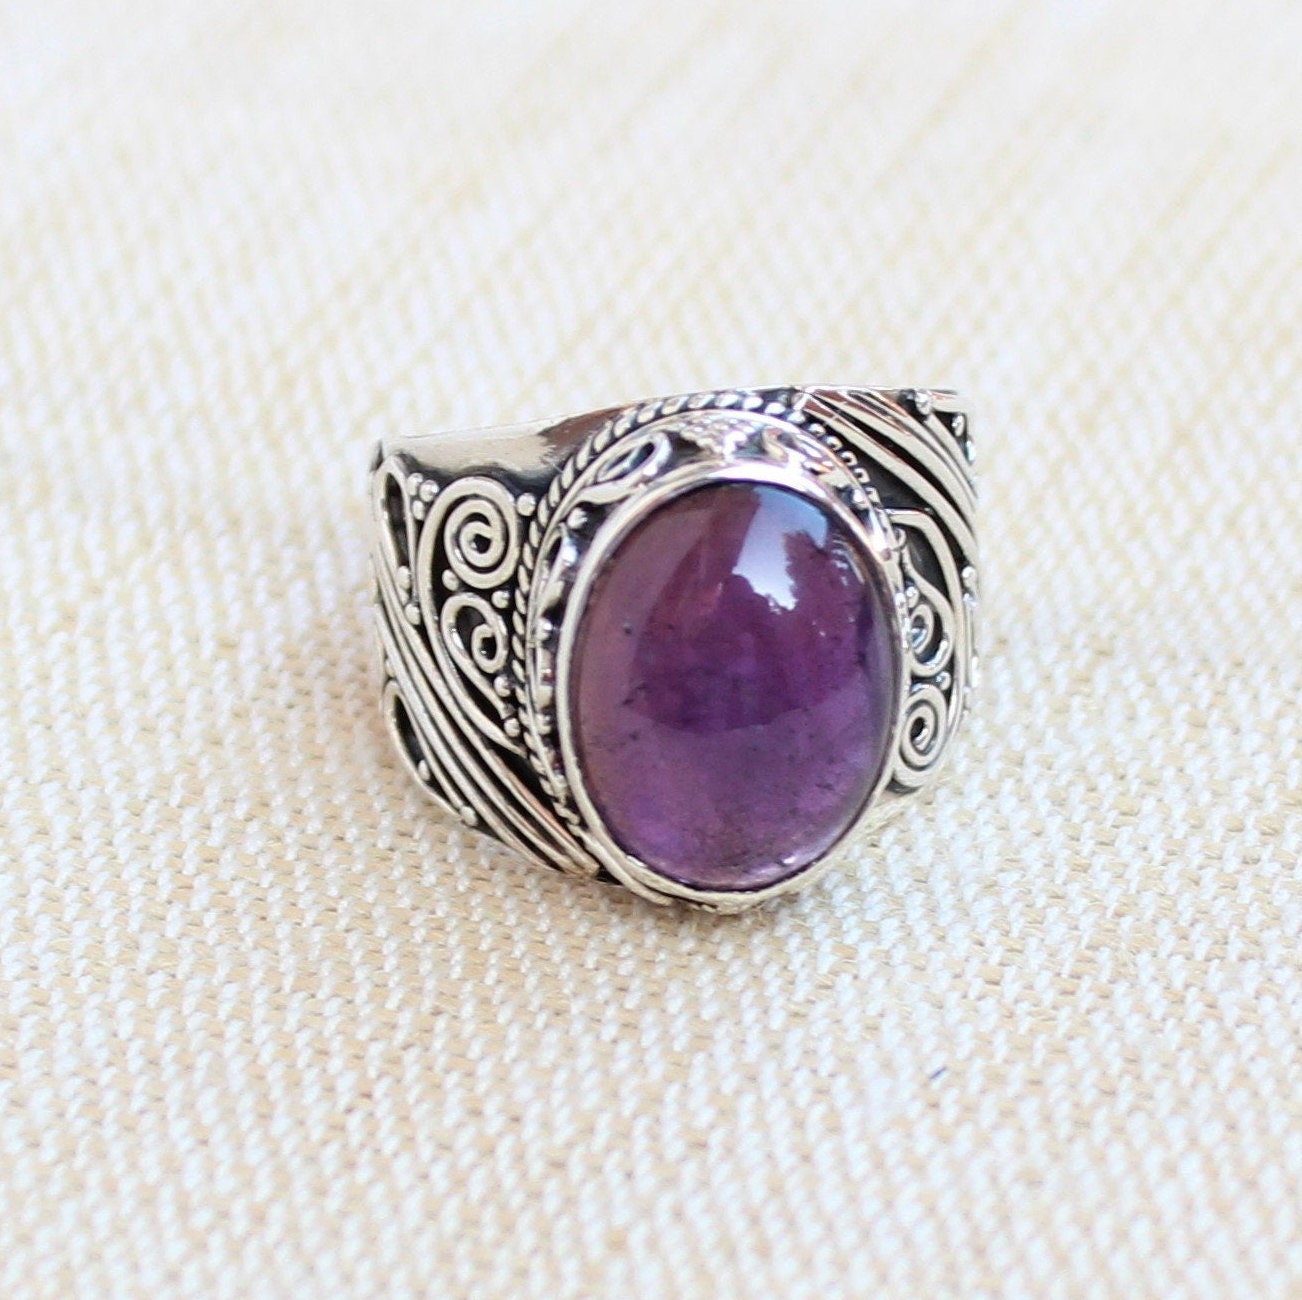 Amethyst rings Victorian style handcrafted jewelry boho | Etsy